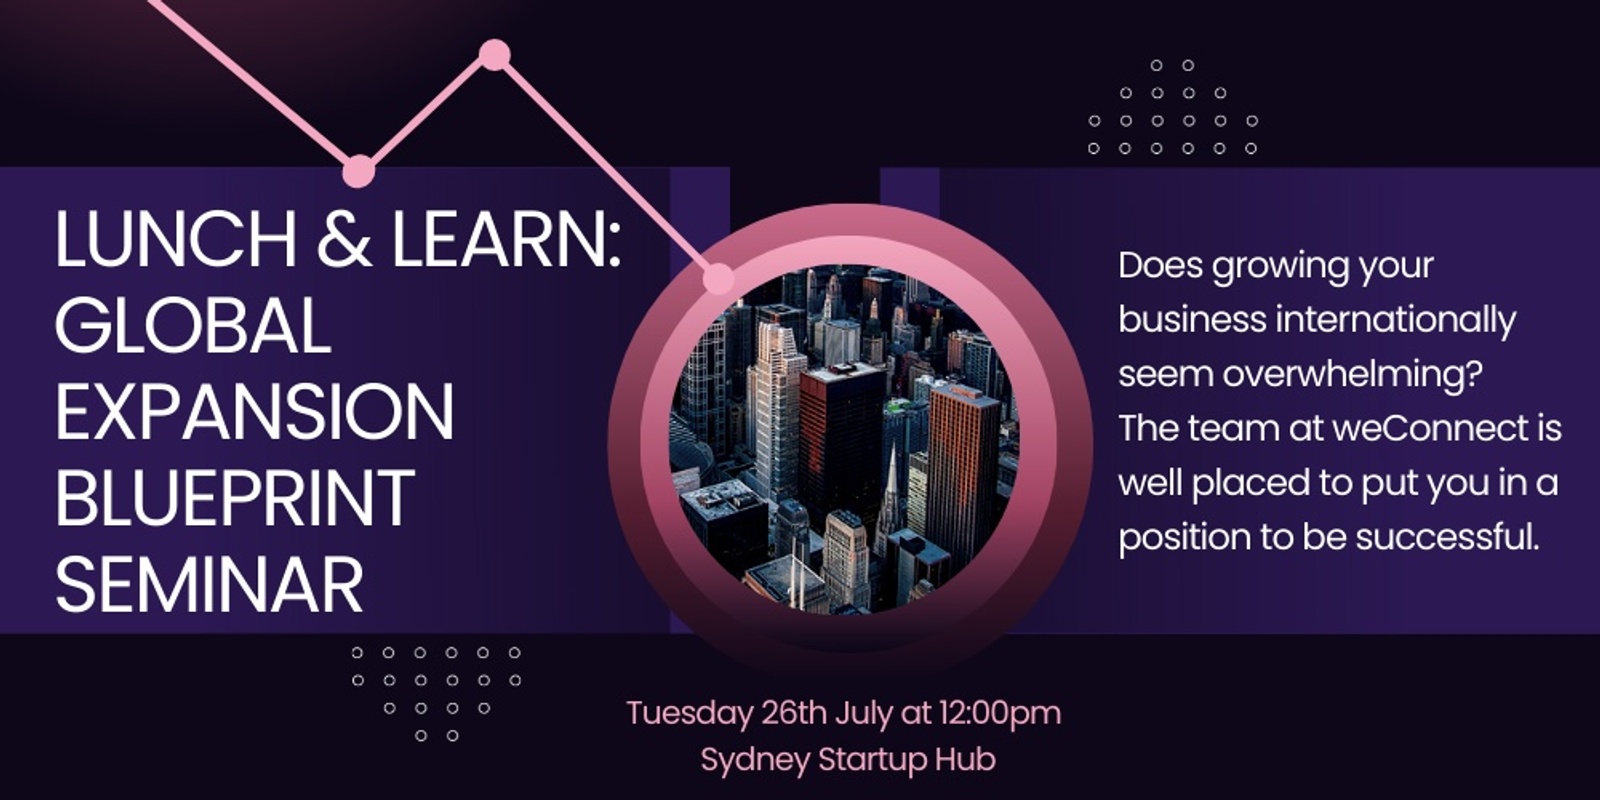 Lunch & Learn: Global Expansion Blueprint Seminar